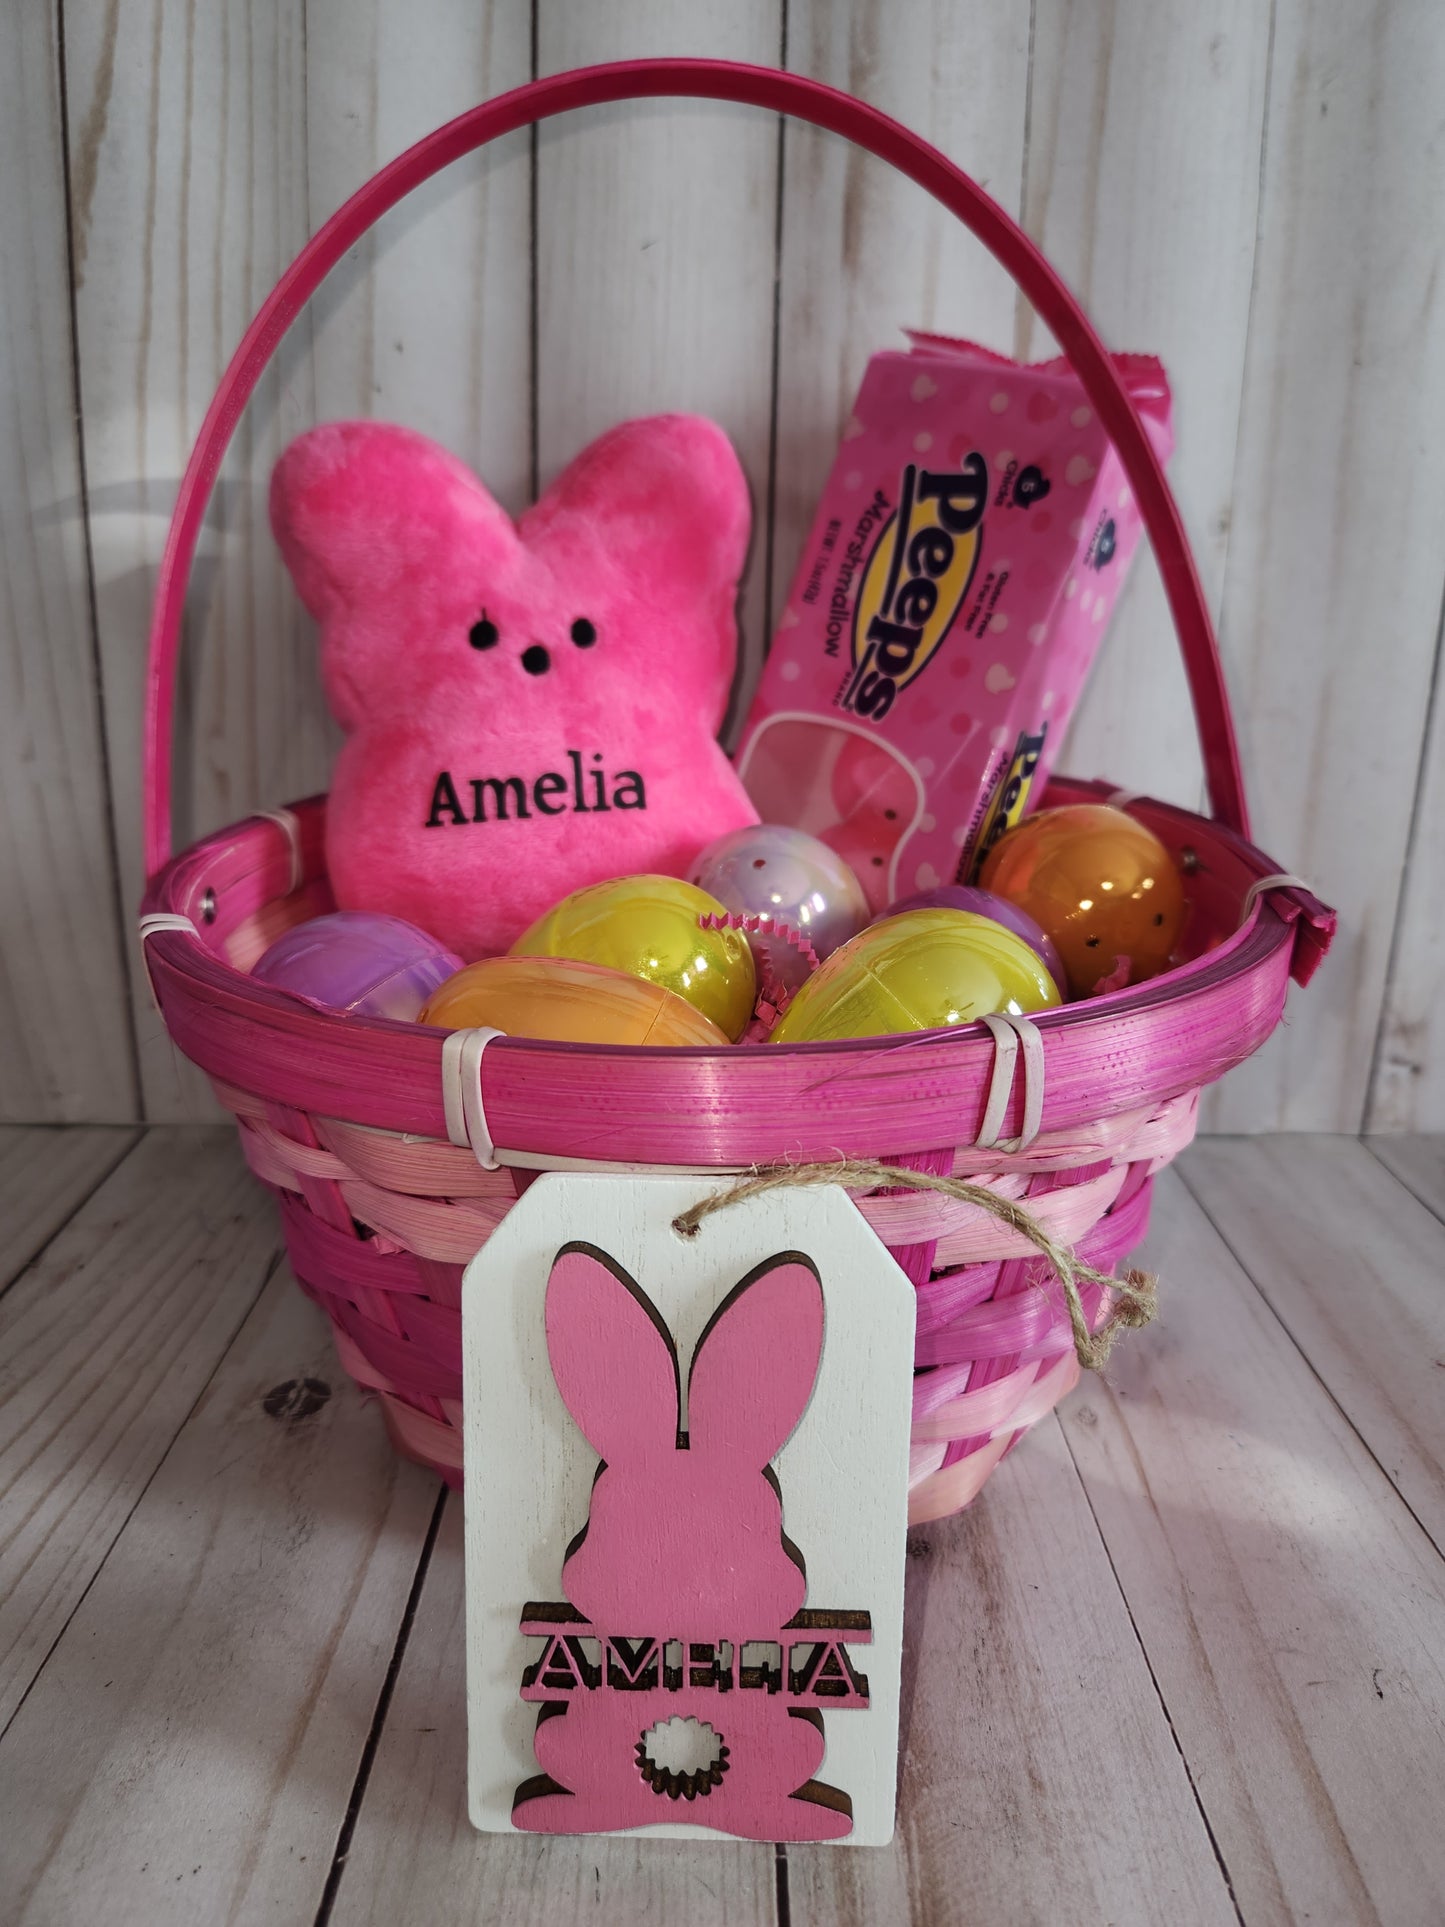 Easter Baskets - Filled and ready!